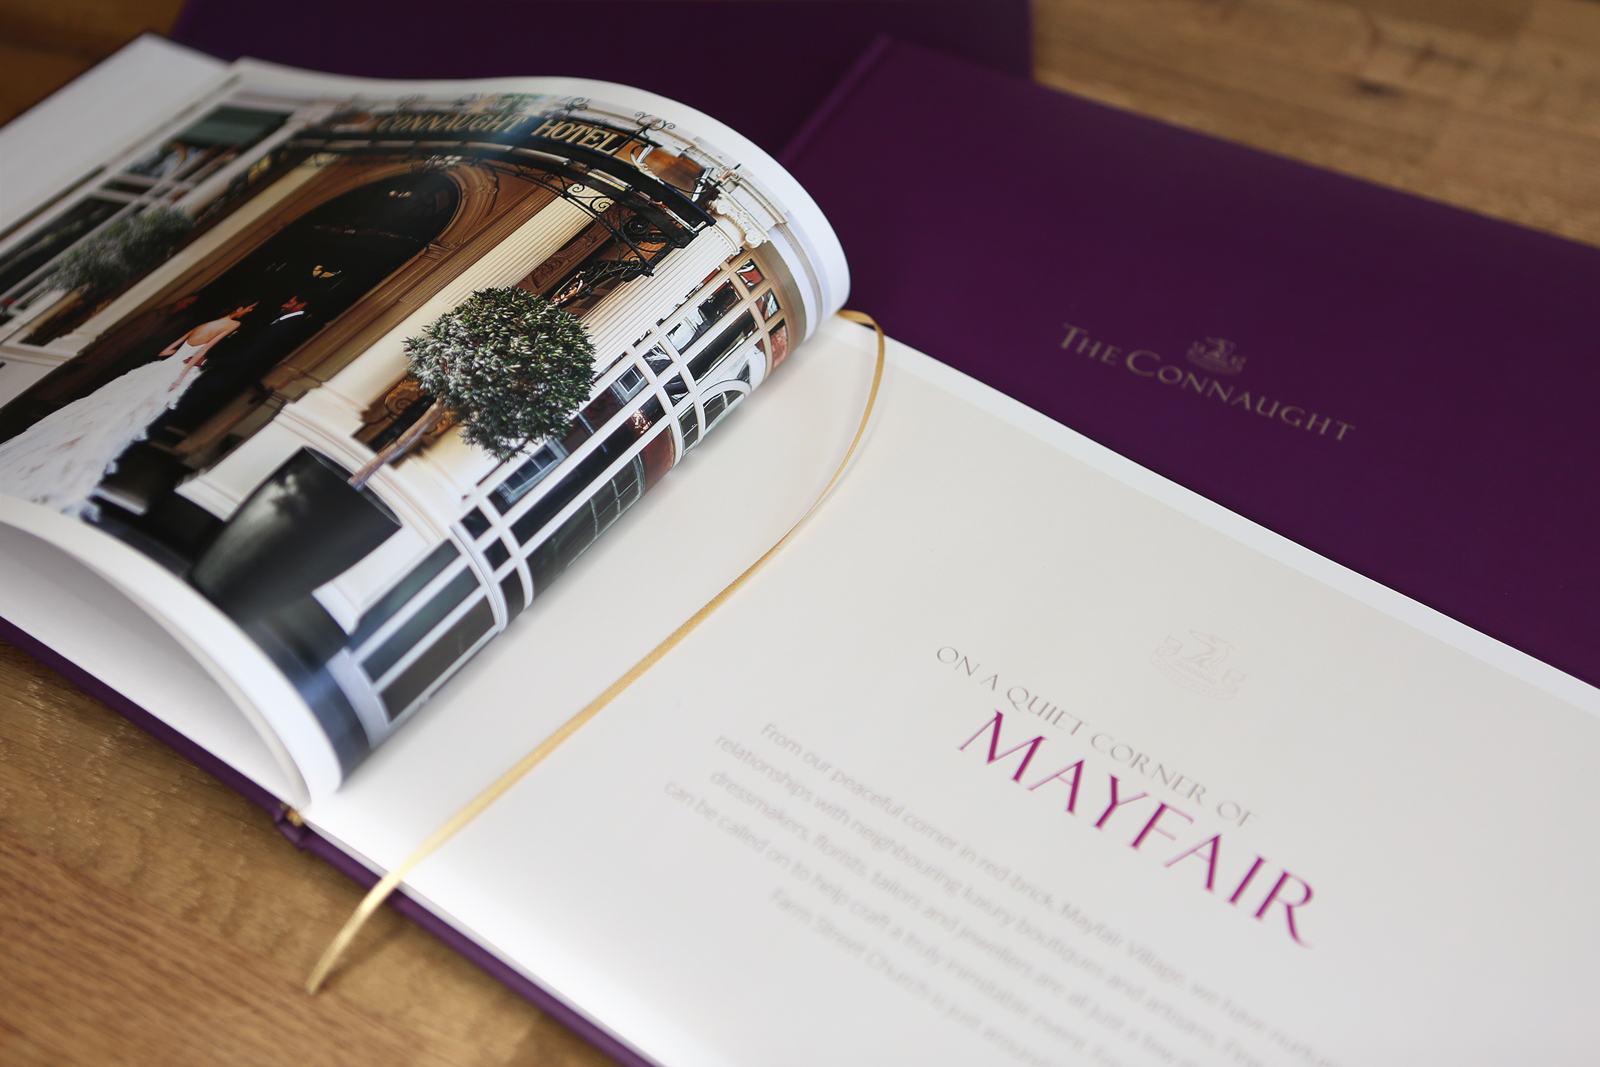 The Connaught events brochure